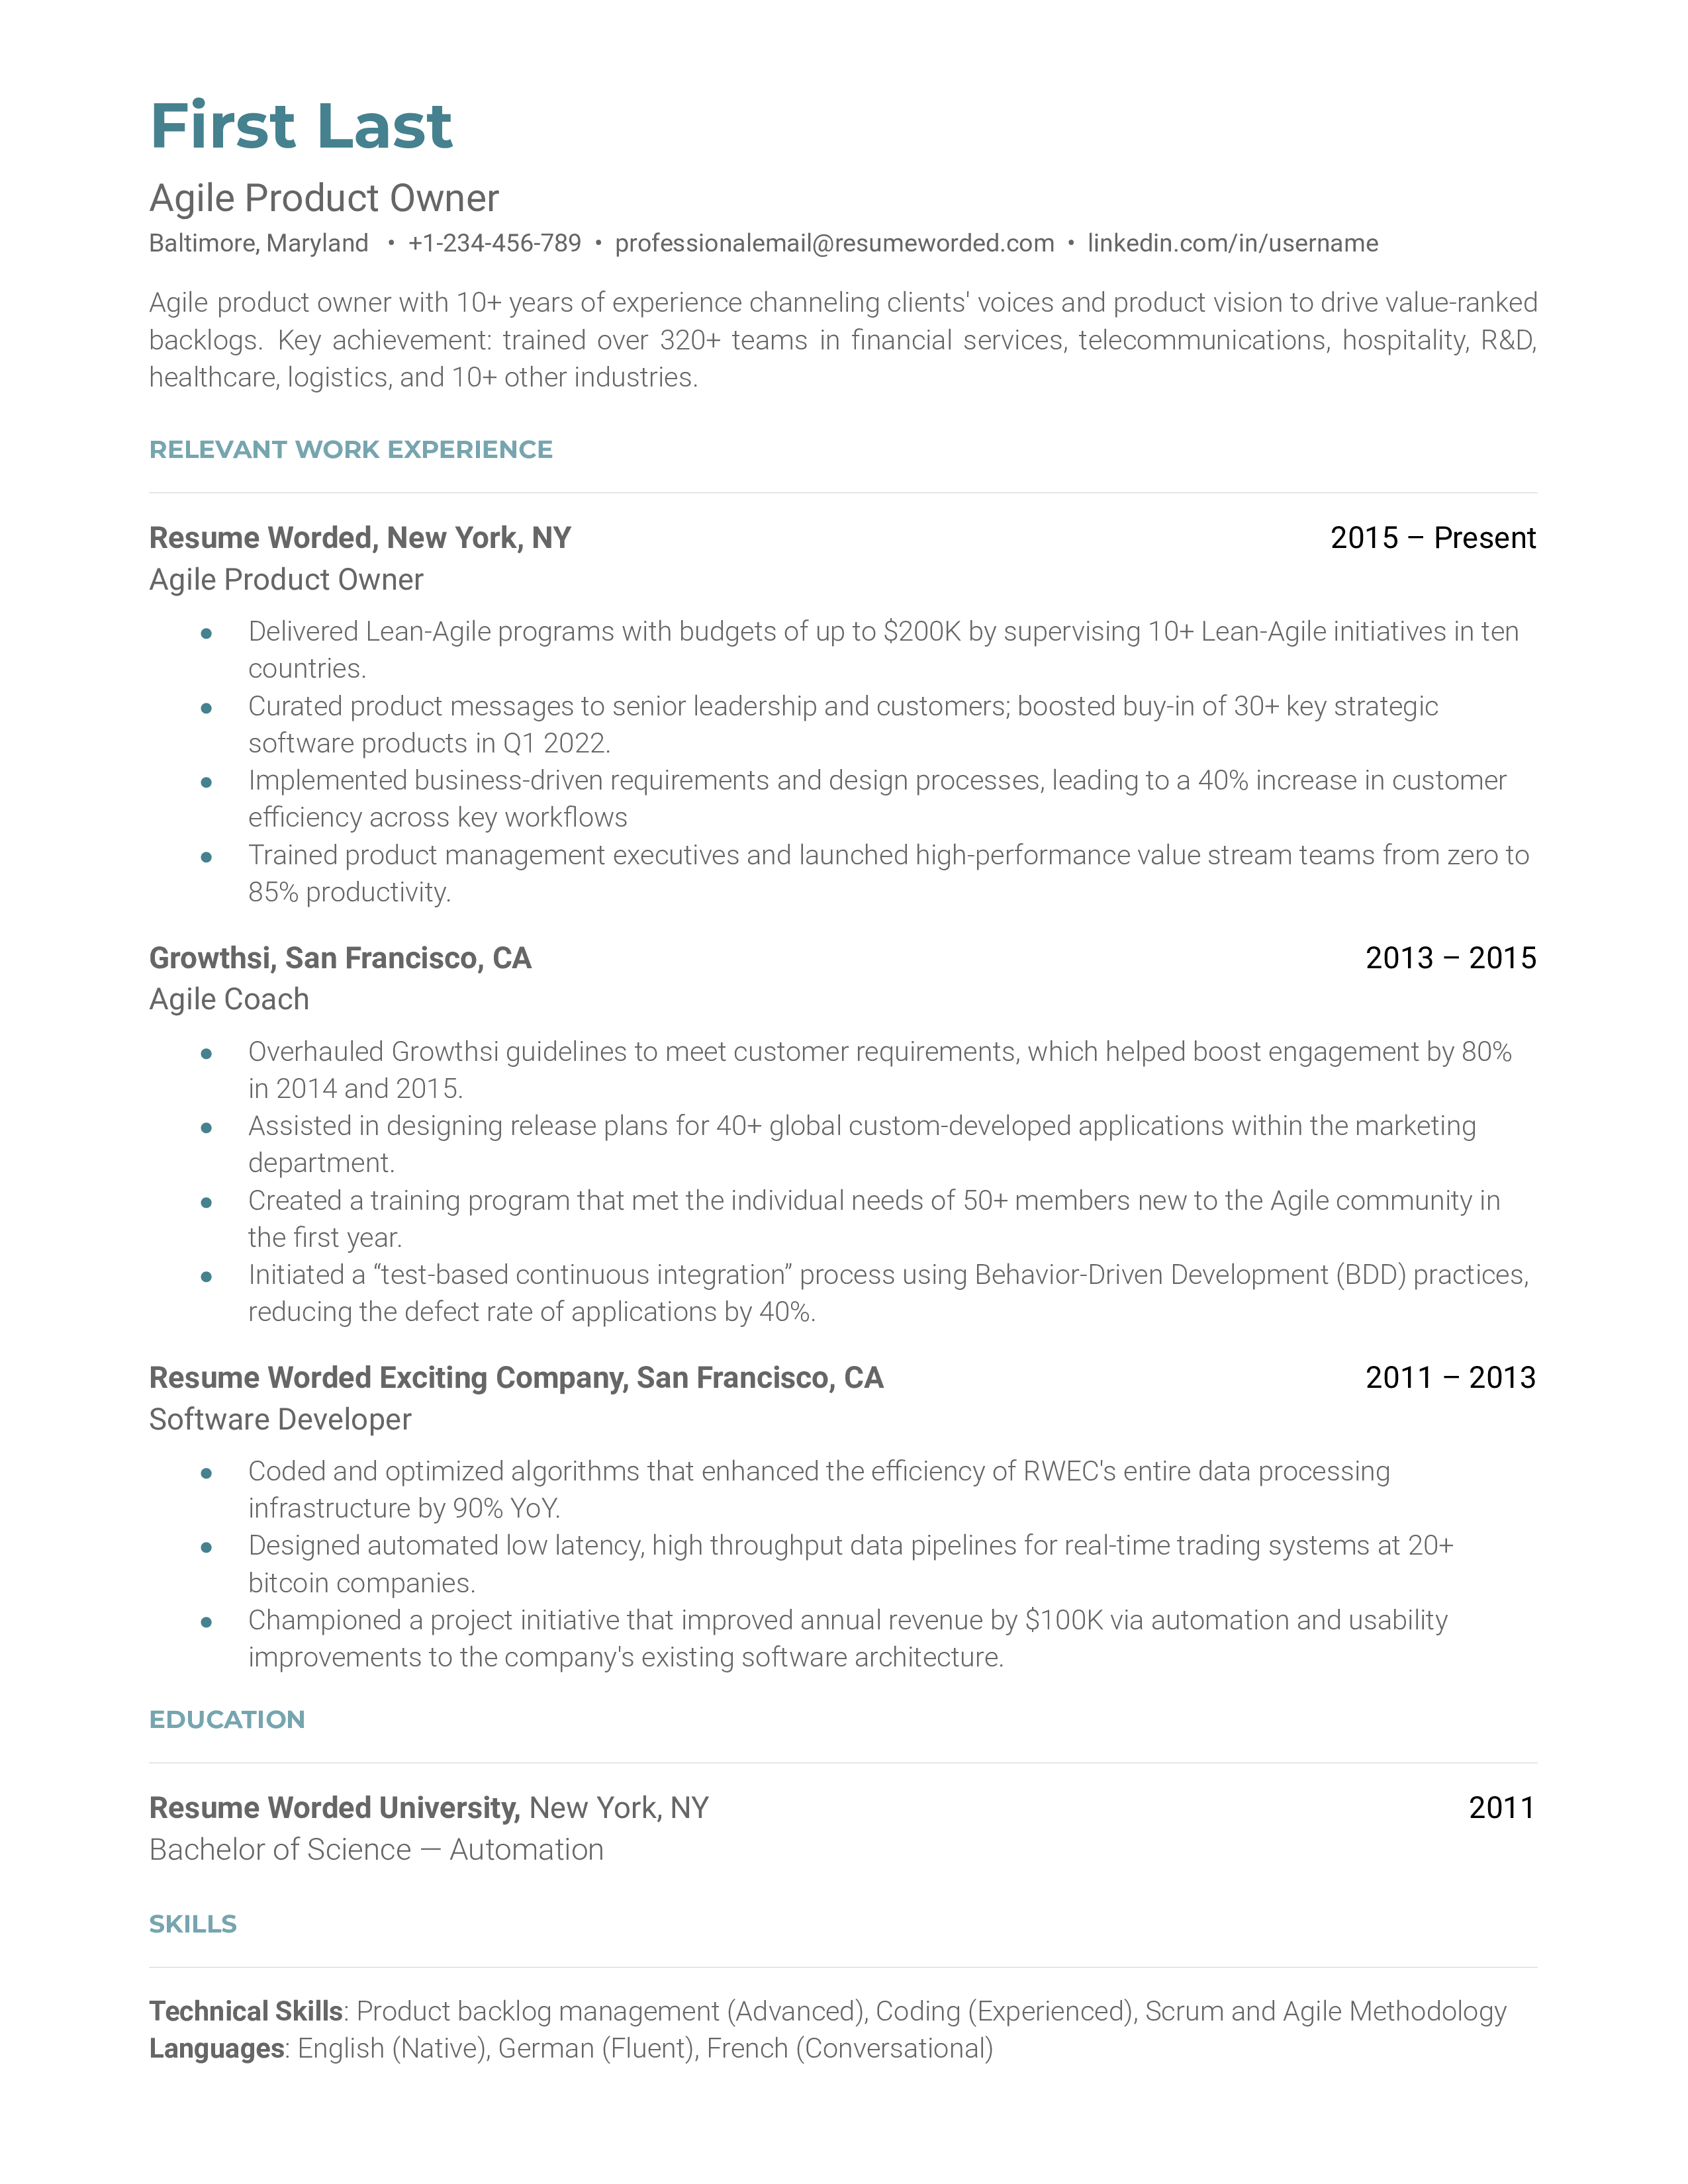 An Agile product owner resume template highlighting Agile experience